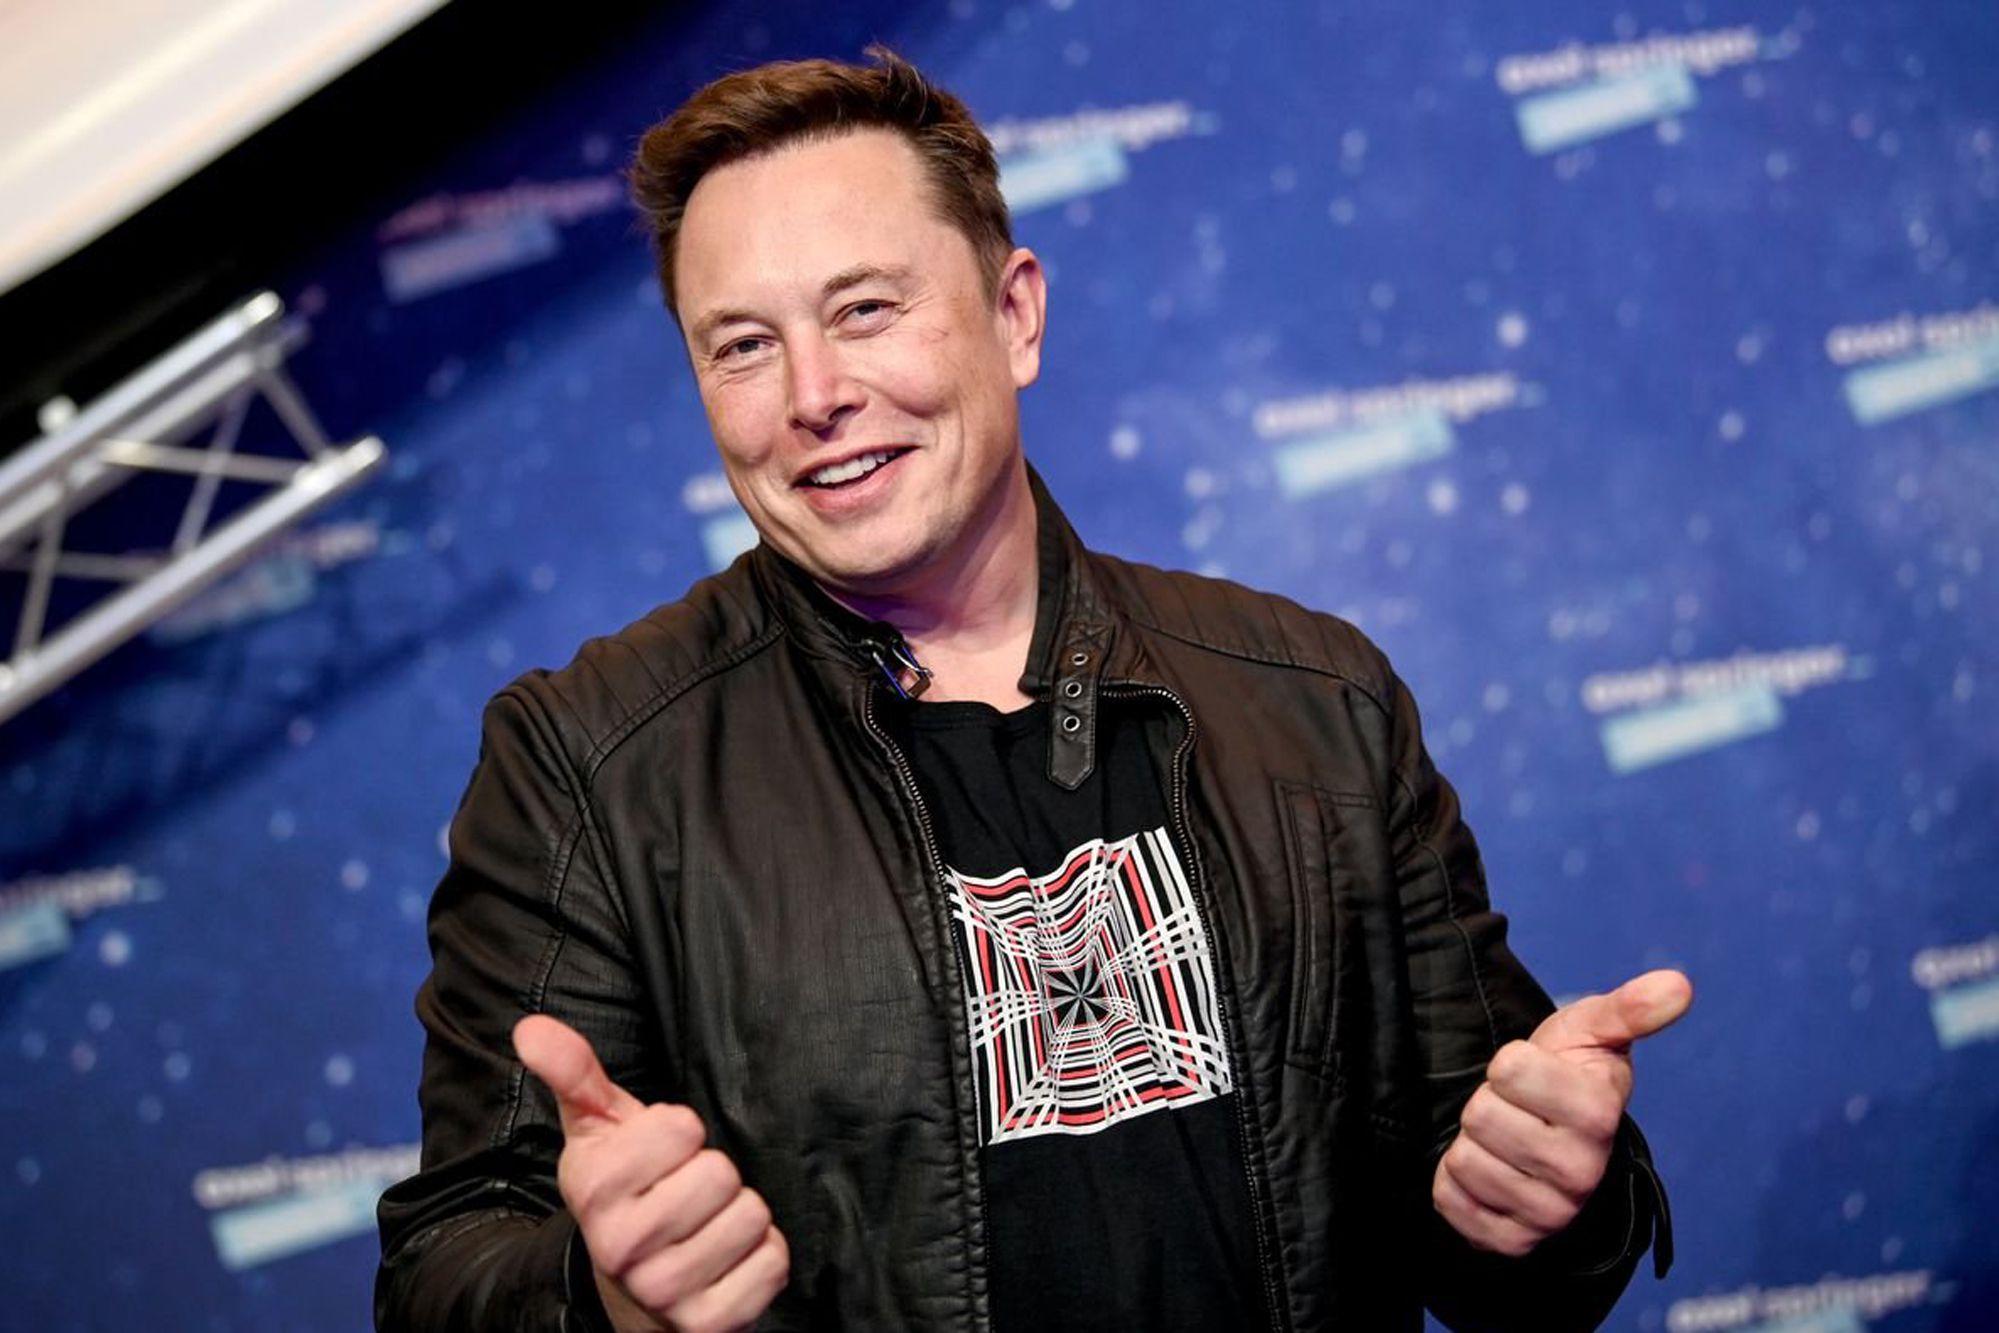 The Six Golden Rules of Elon Musk require his employees to follow them